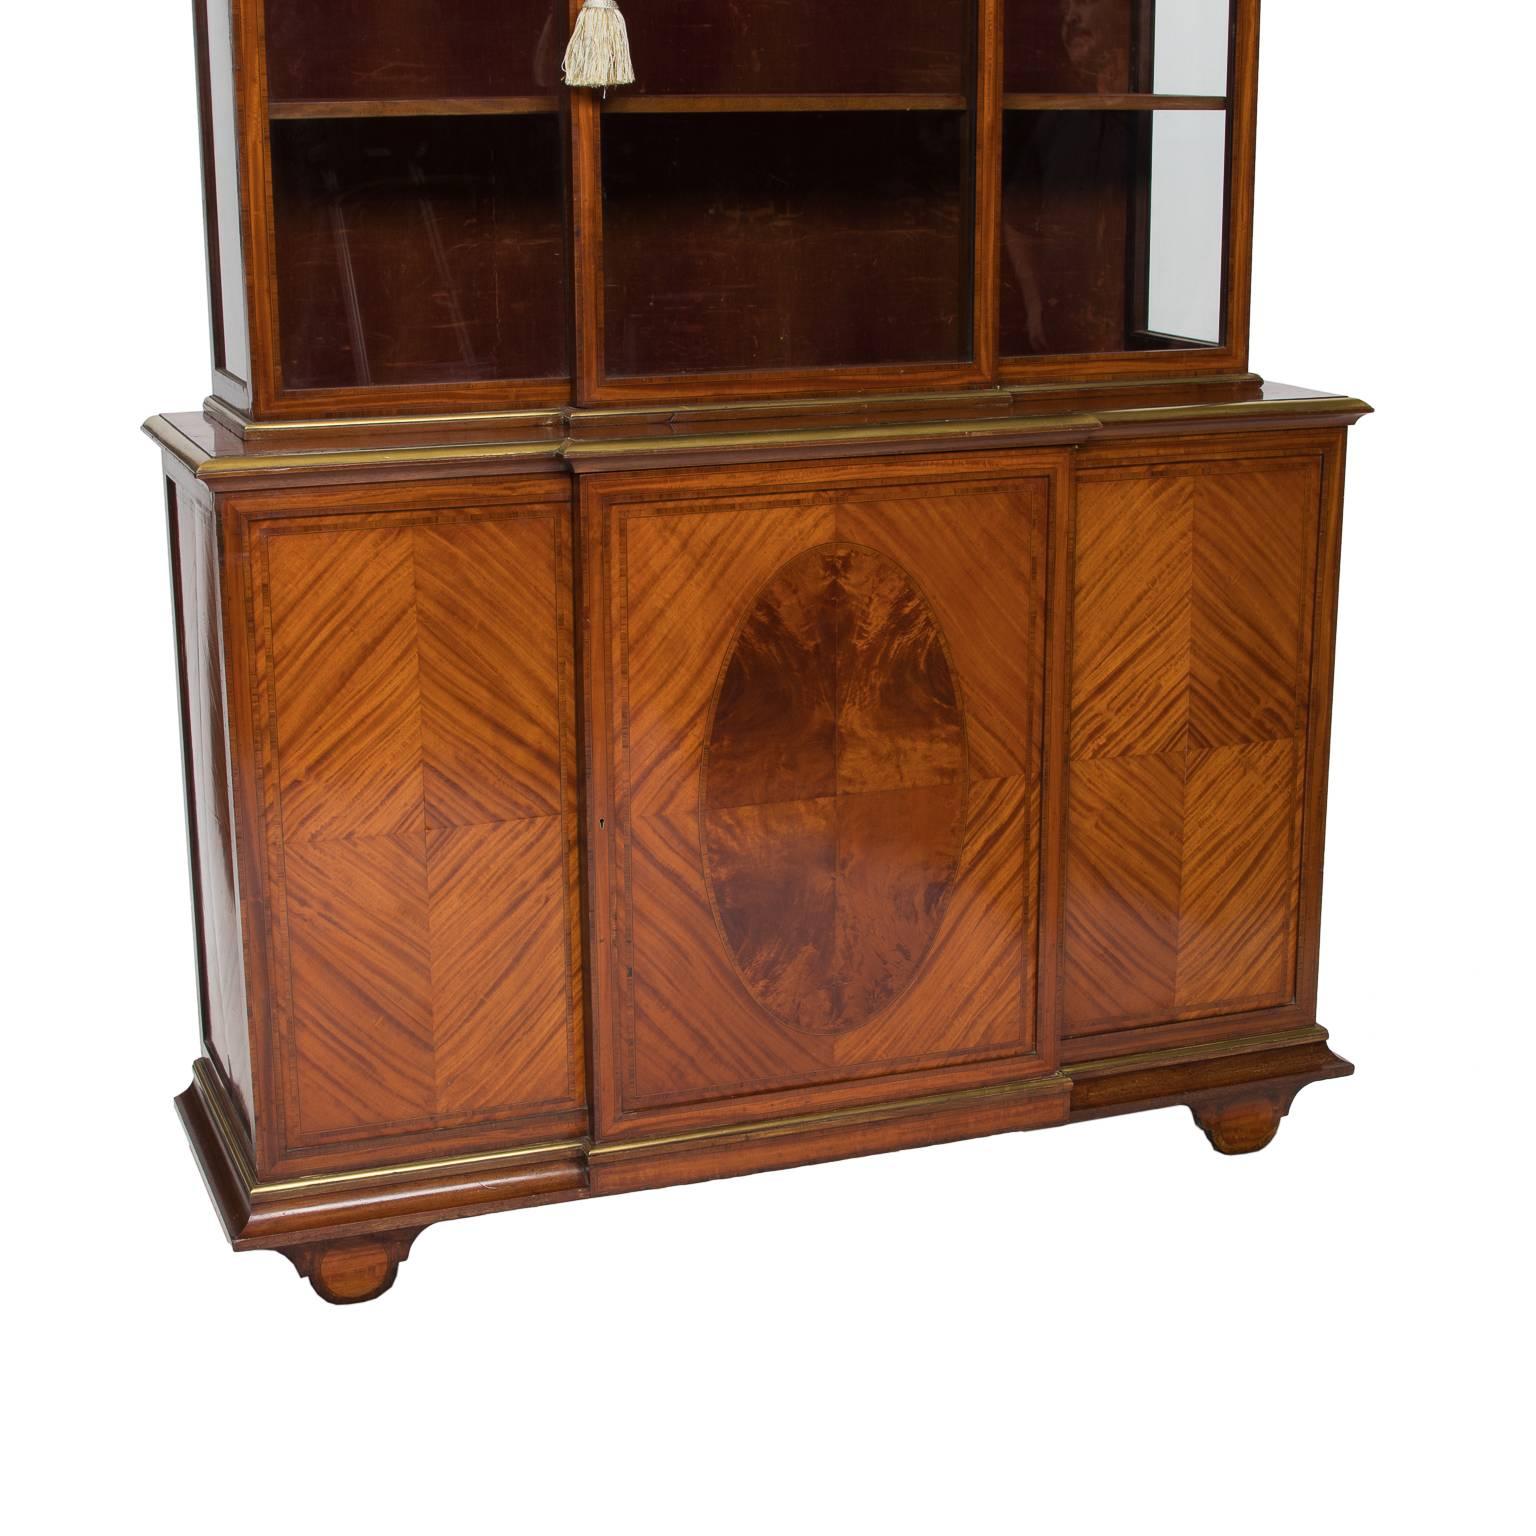 19th century Georgian display cabinet made from highly figured anigre veneer, each panel of the base is bookmatched and the center has a burled oval inlay. The base has one door which opens to storage. The cabinet has a break front to the top and